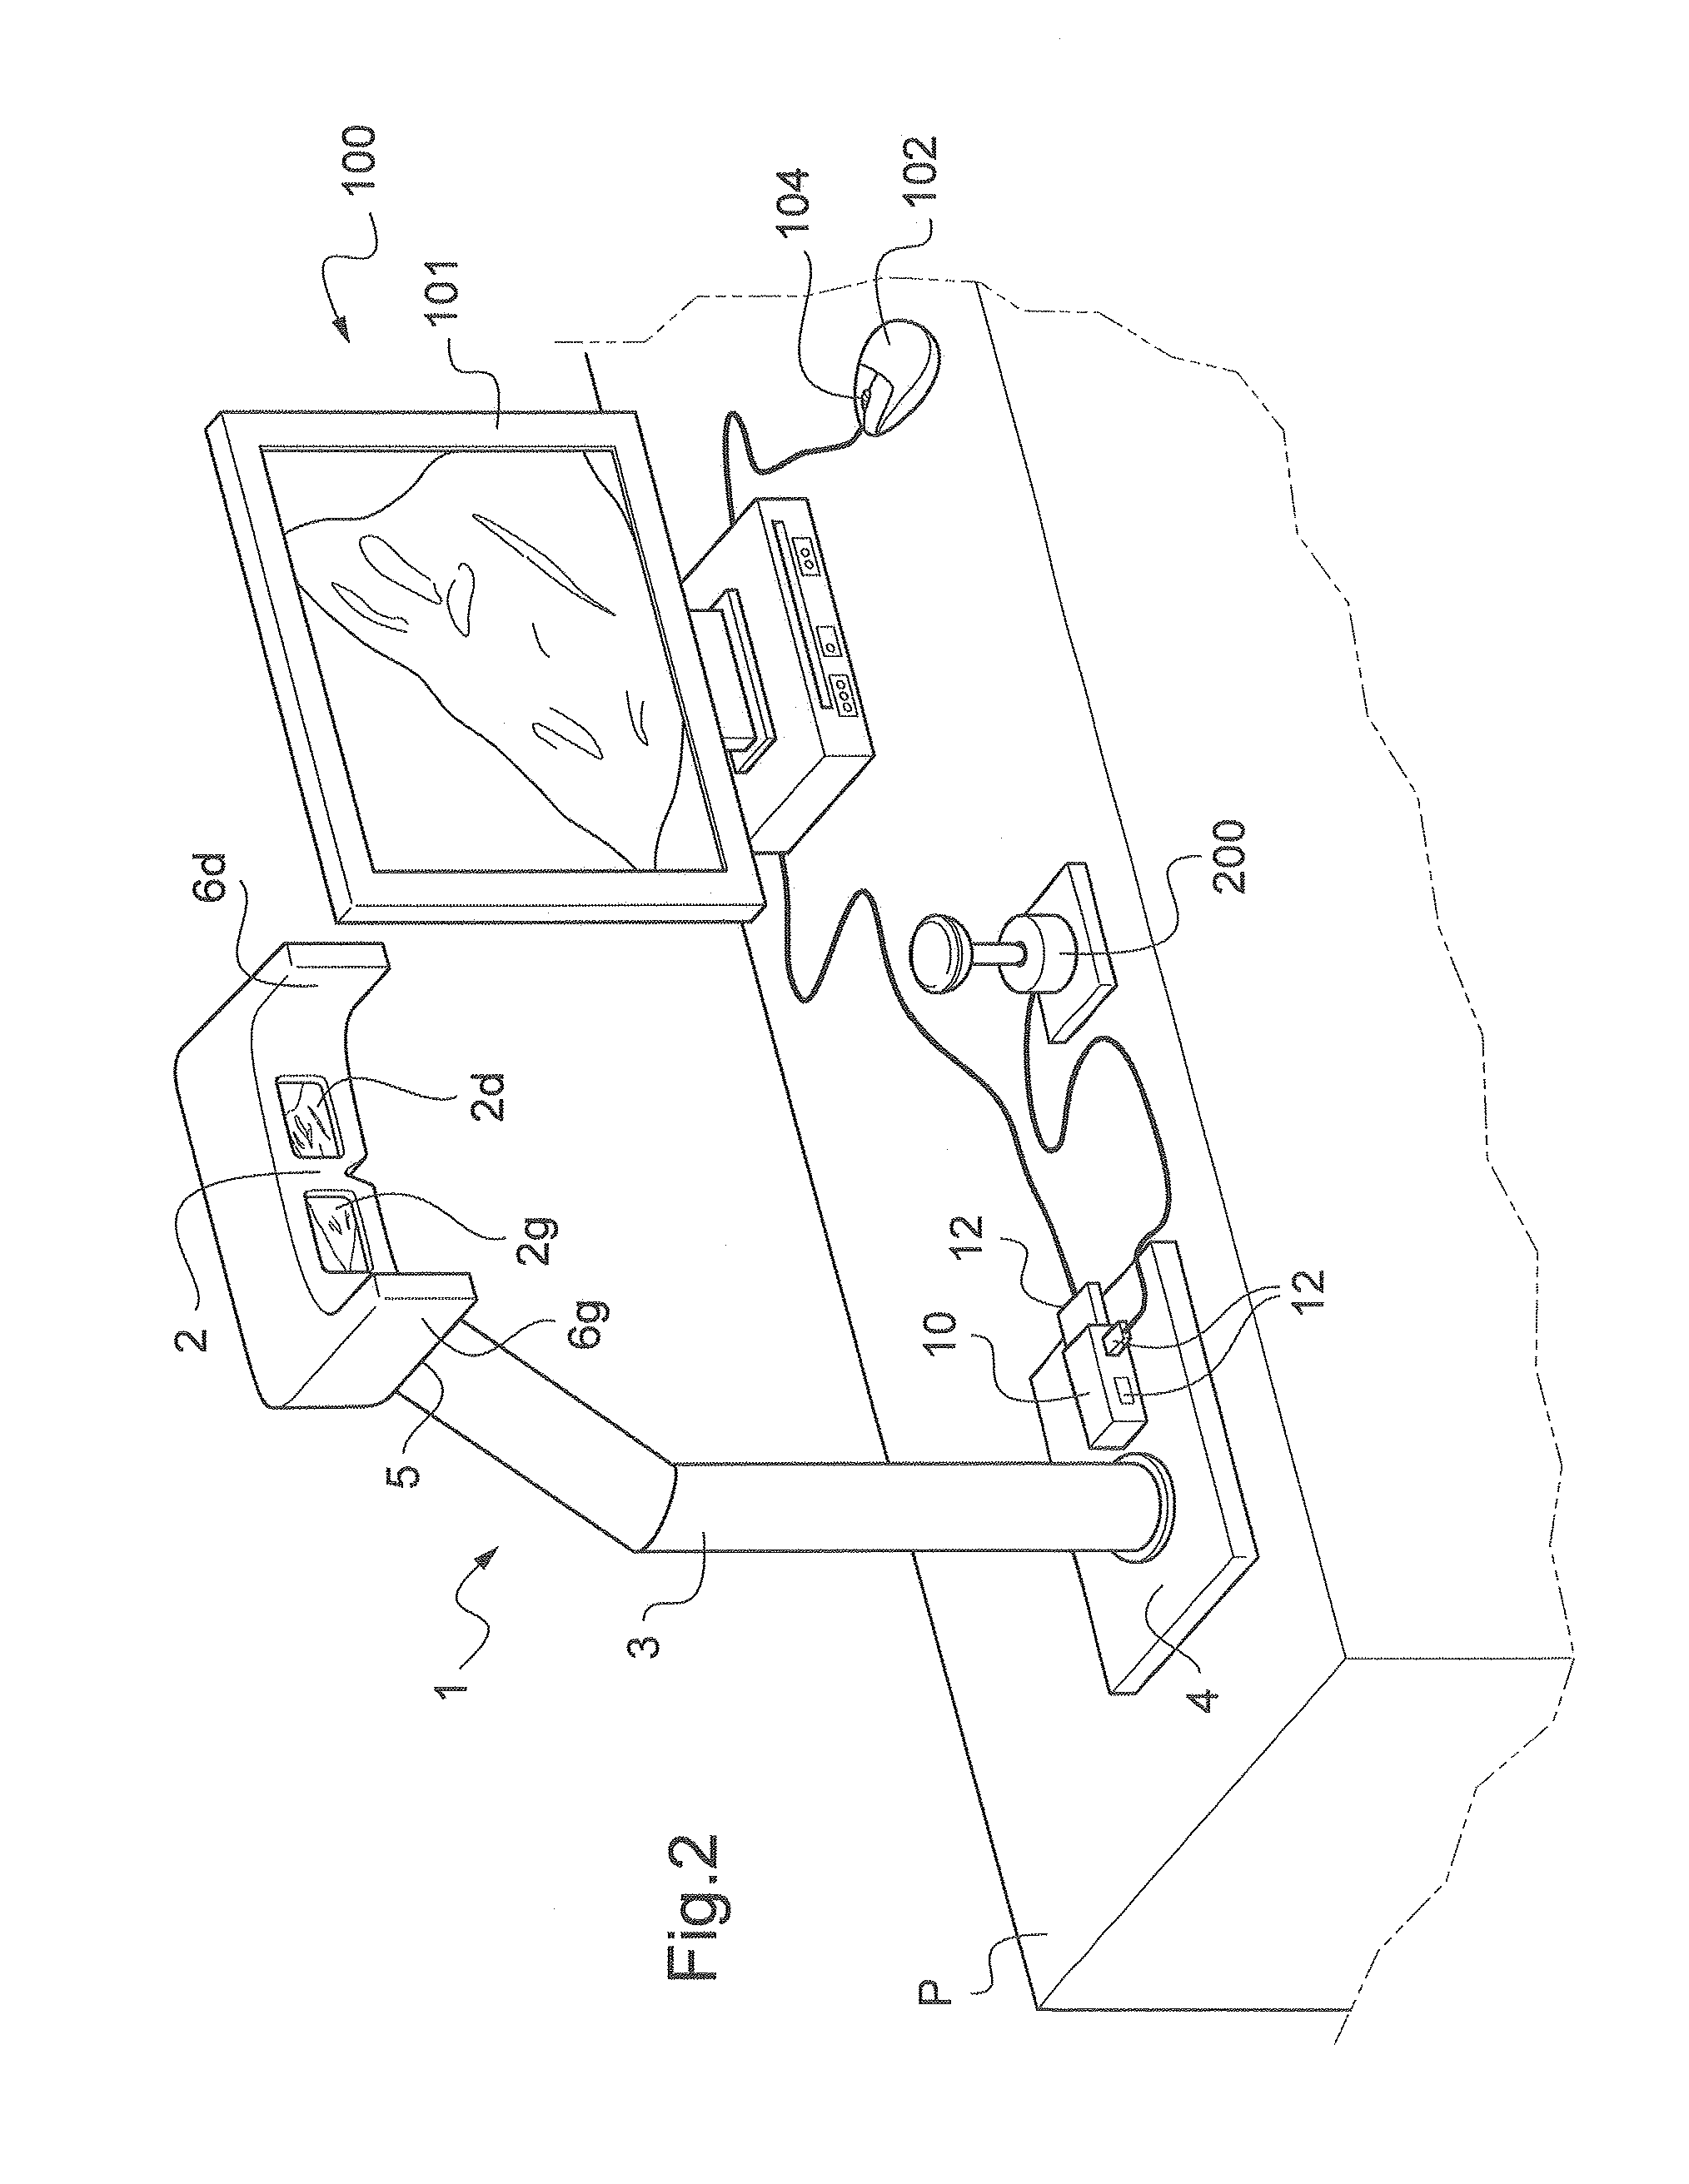 Device for viewing a digital image